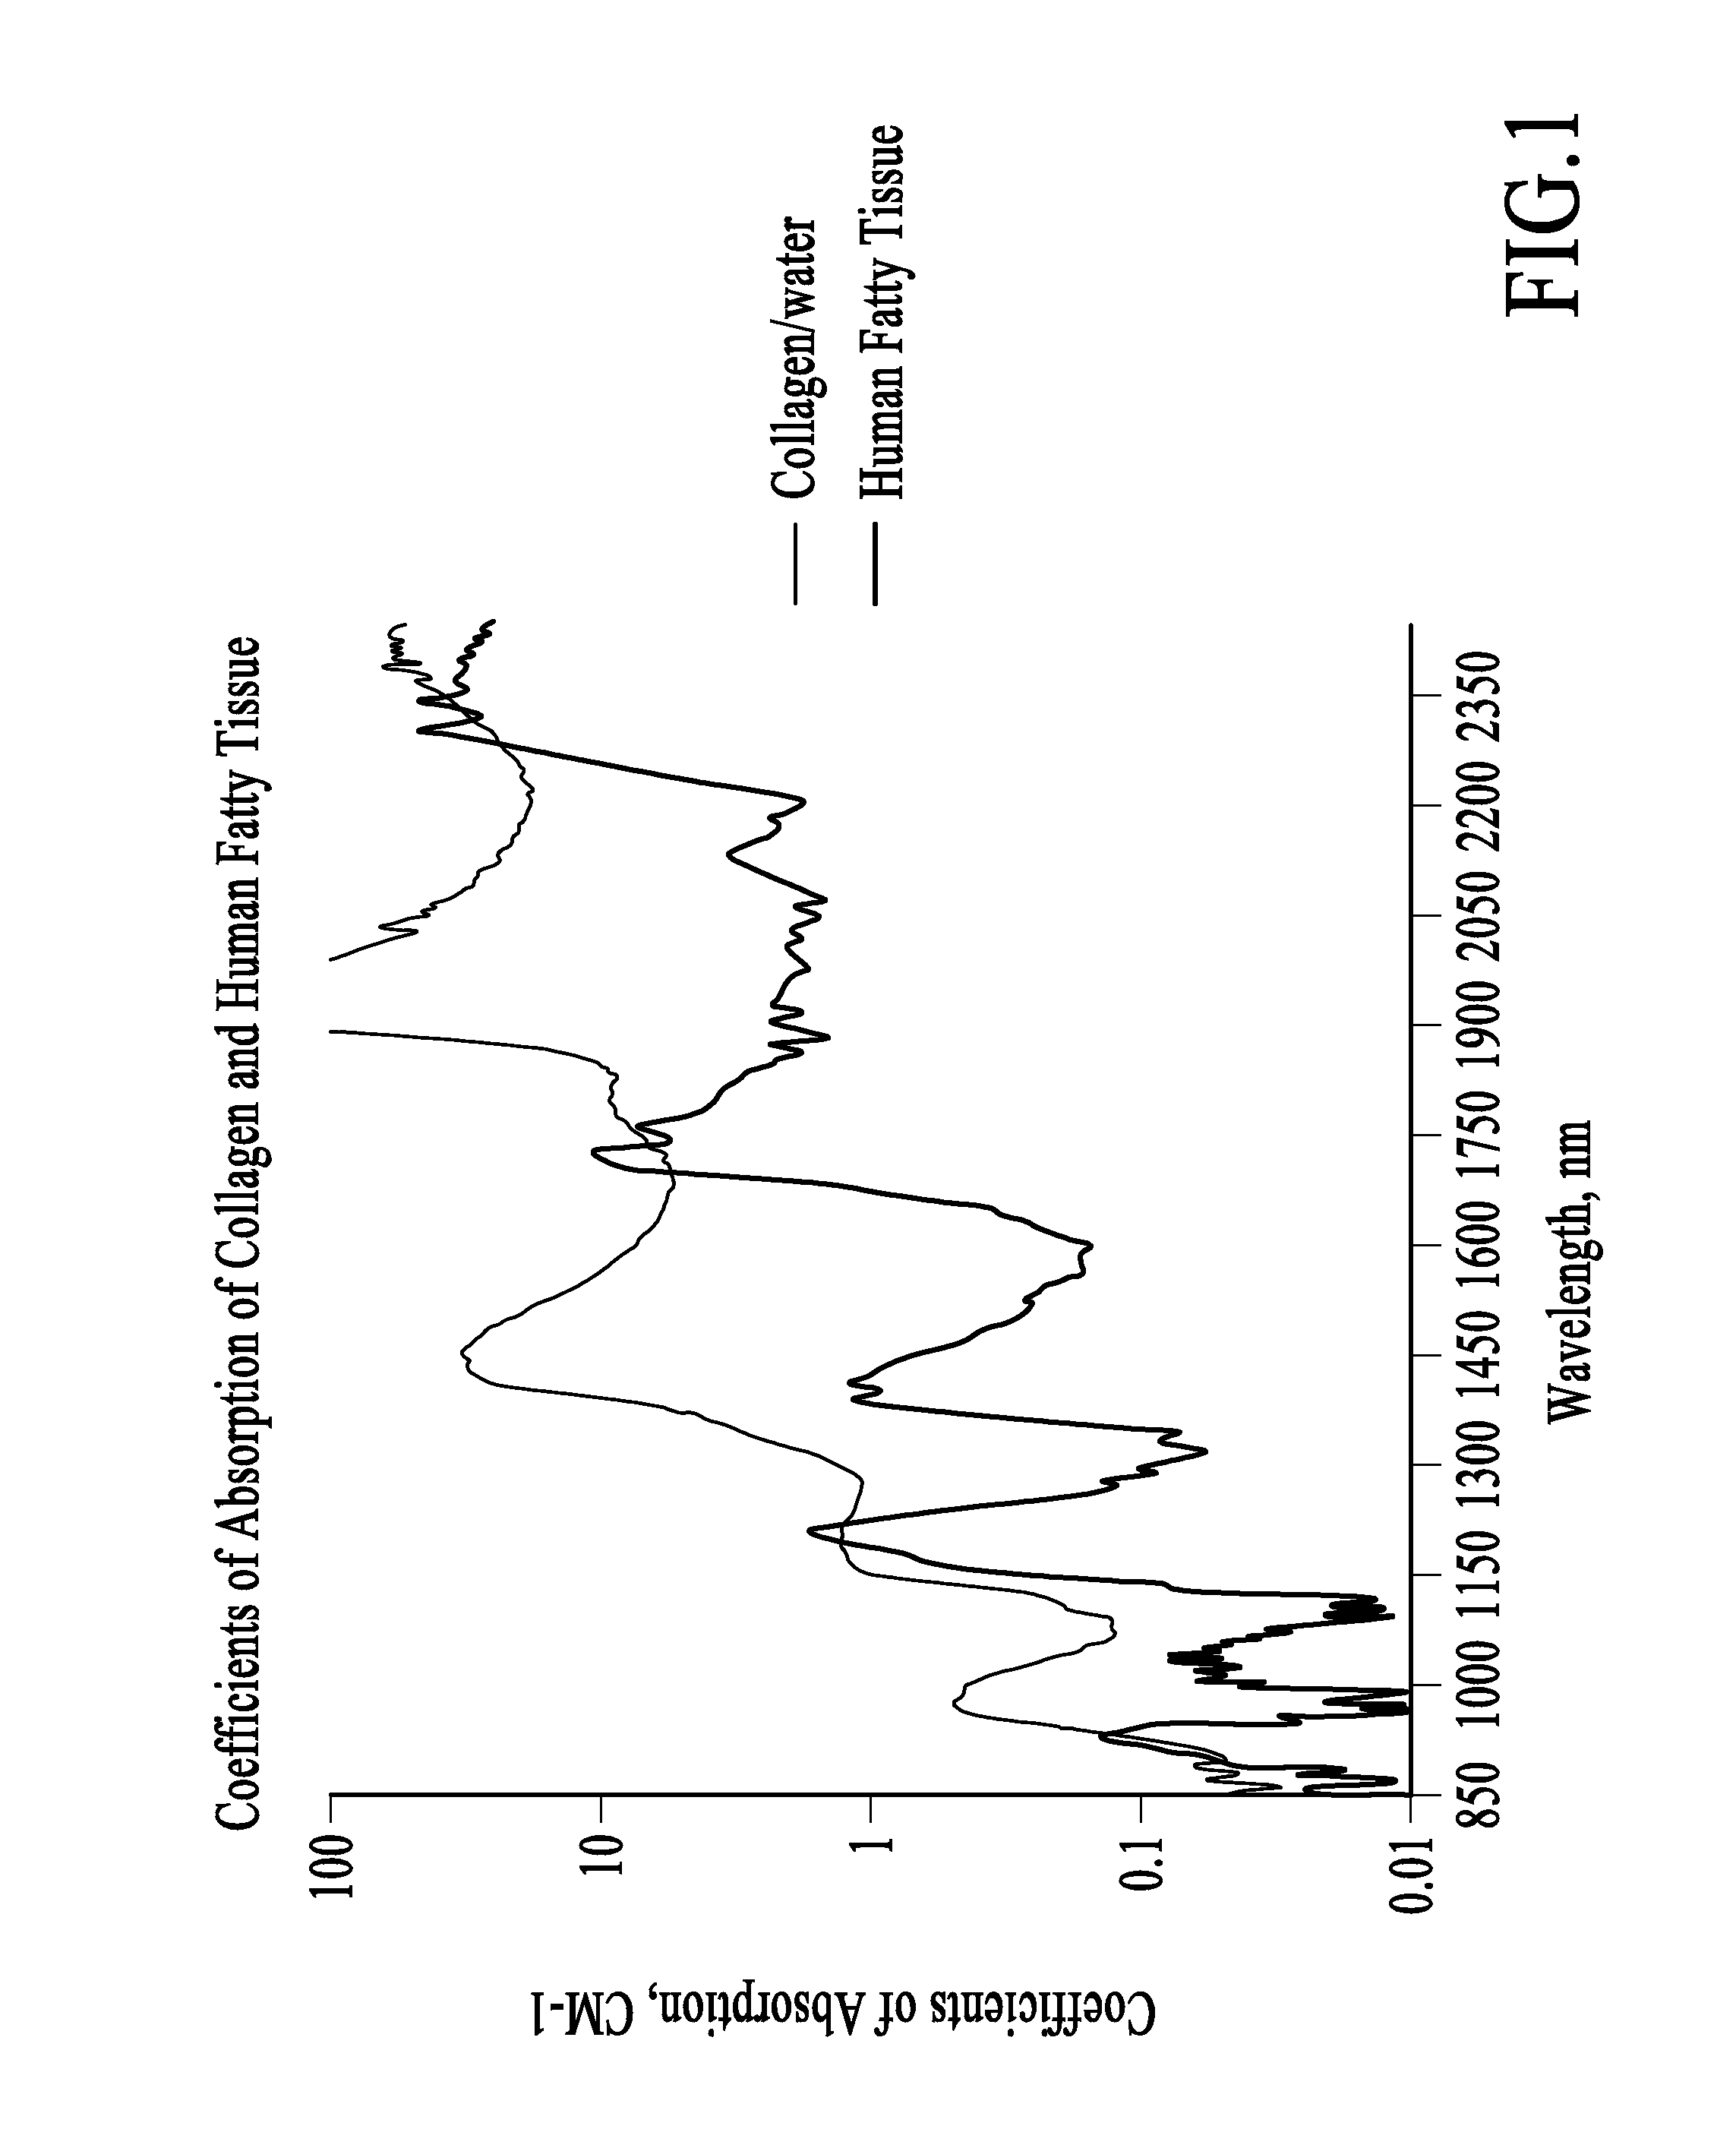 Treatment of cellulite and adipose tissue with mid-infrared radiation